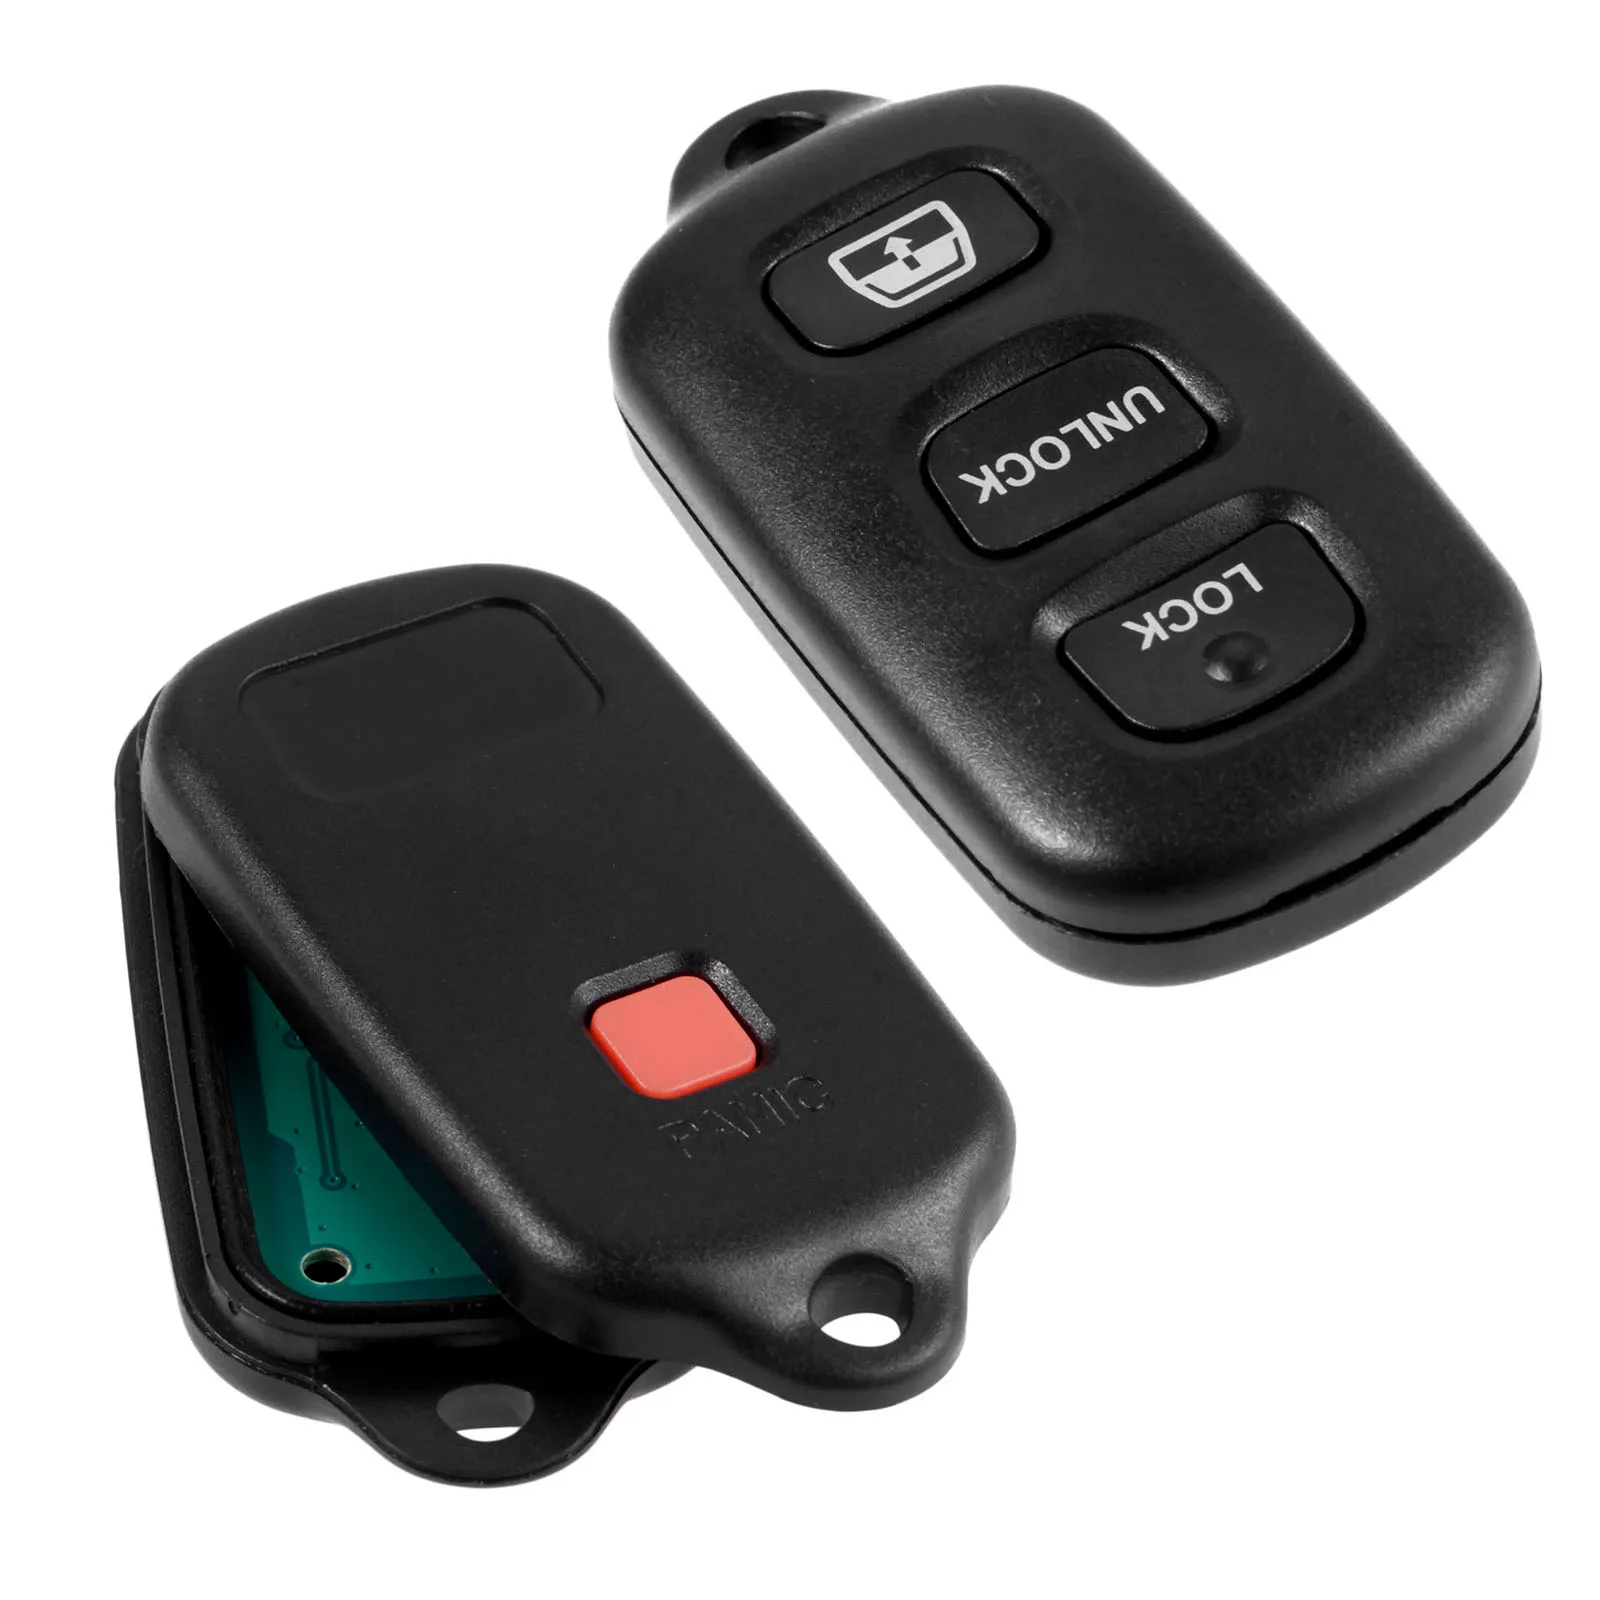 Yetaha 2PCS Keyless Remote Key Fob For Toyota Sequoia 4 Runner 2003 2004 2005 2006 2007 315MHz 4 Buttons With Panic Car Remtekey